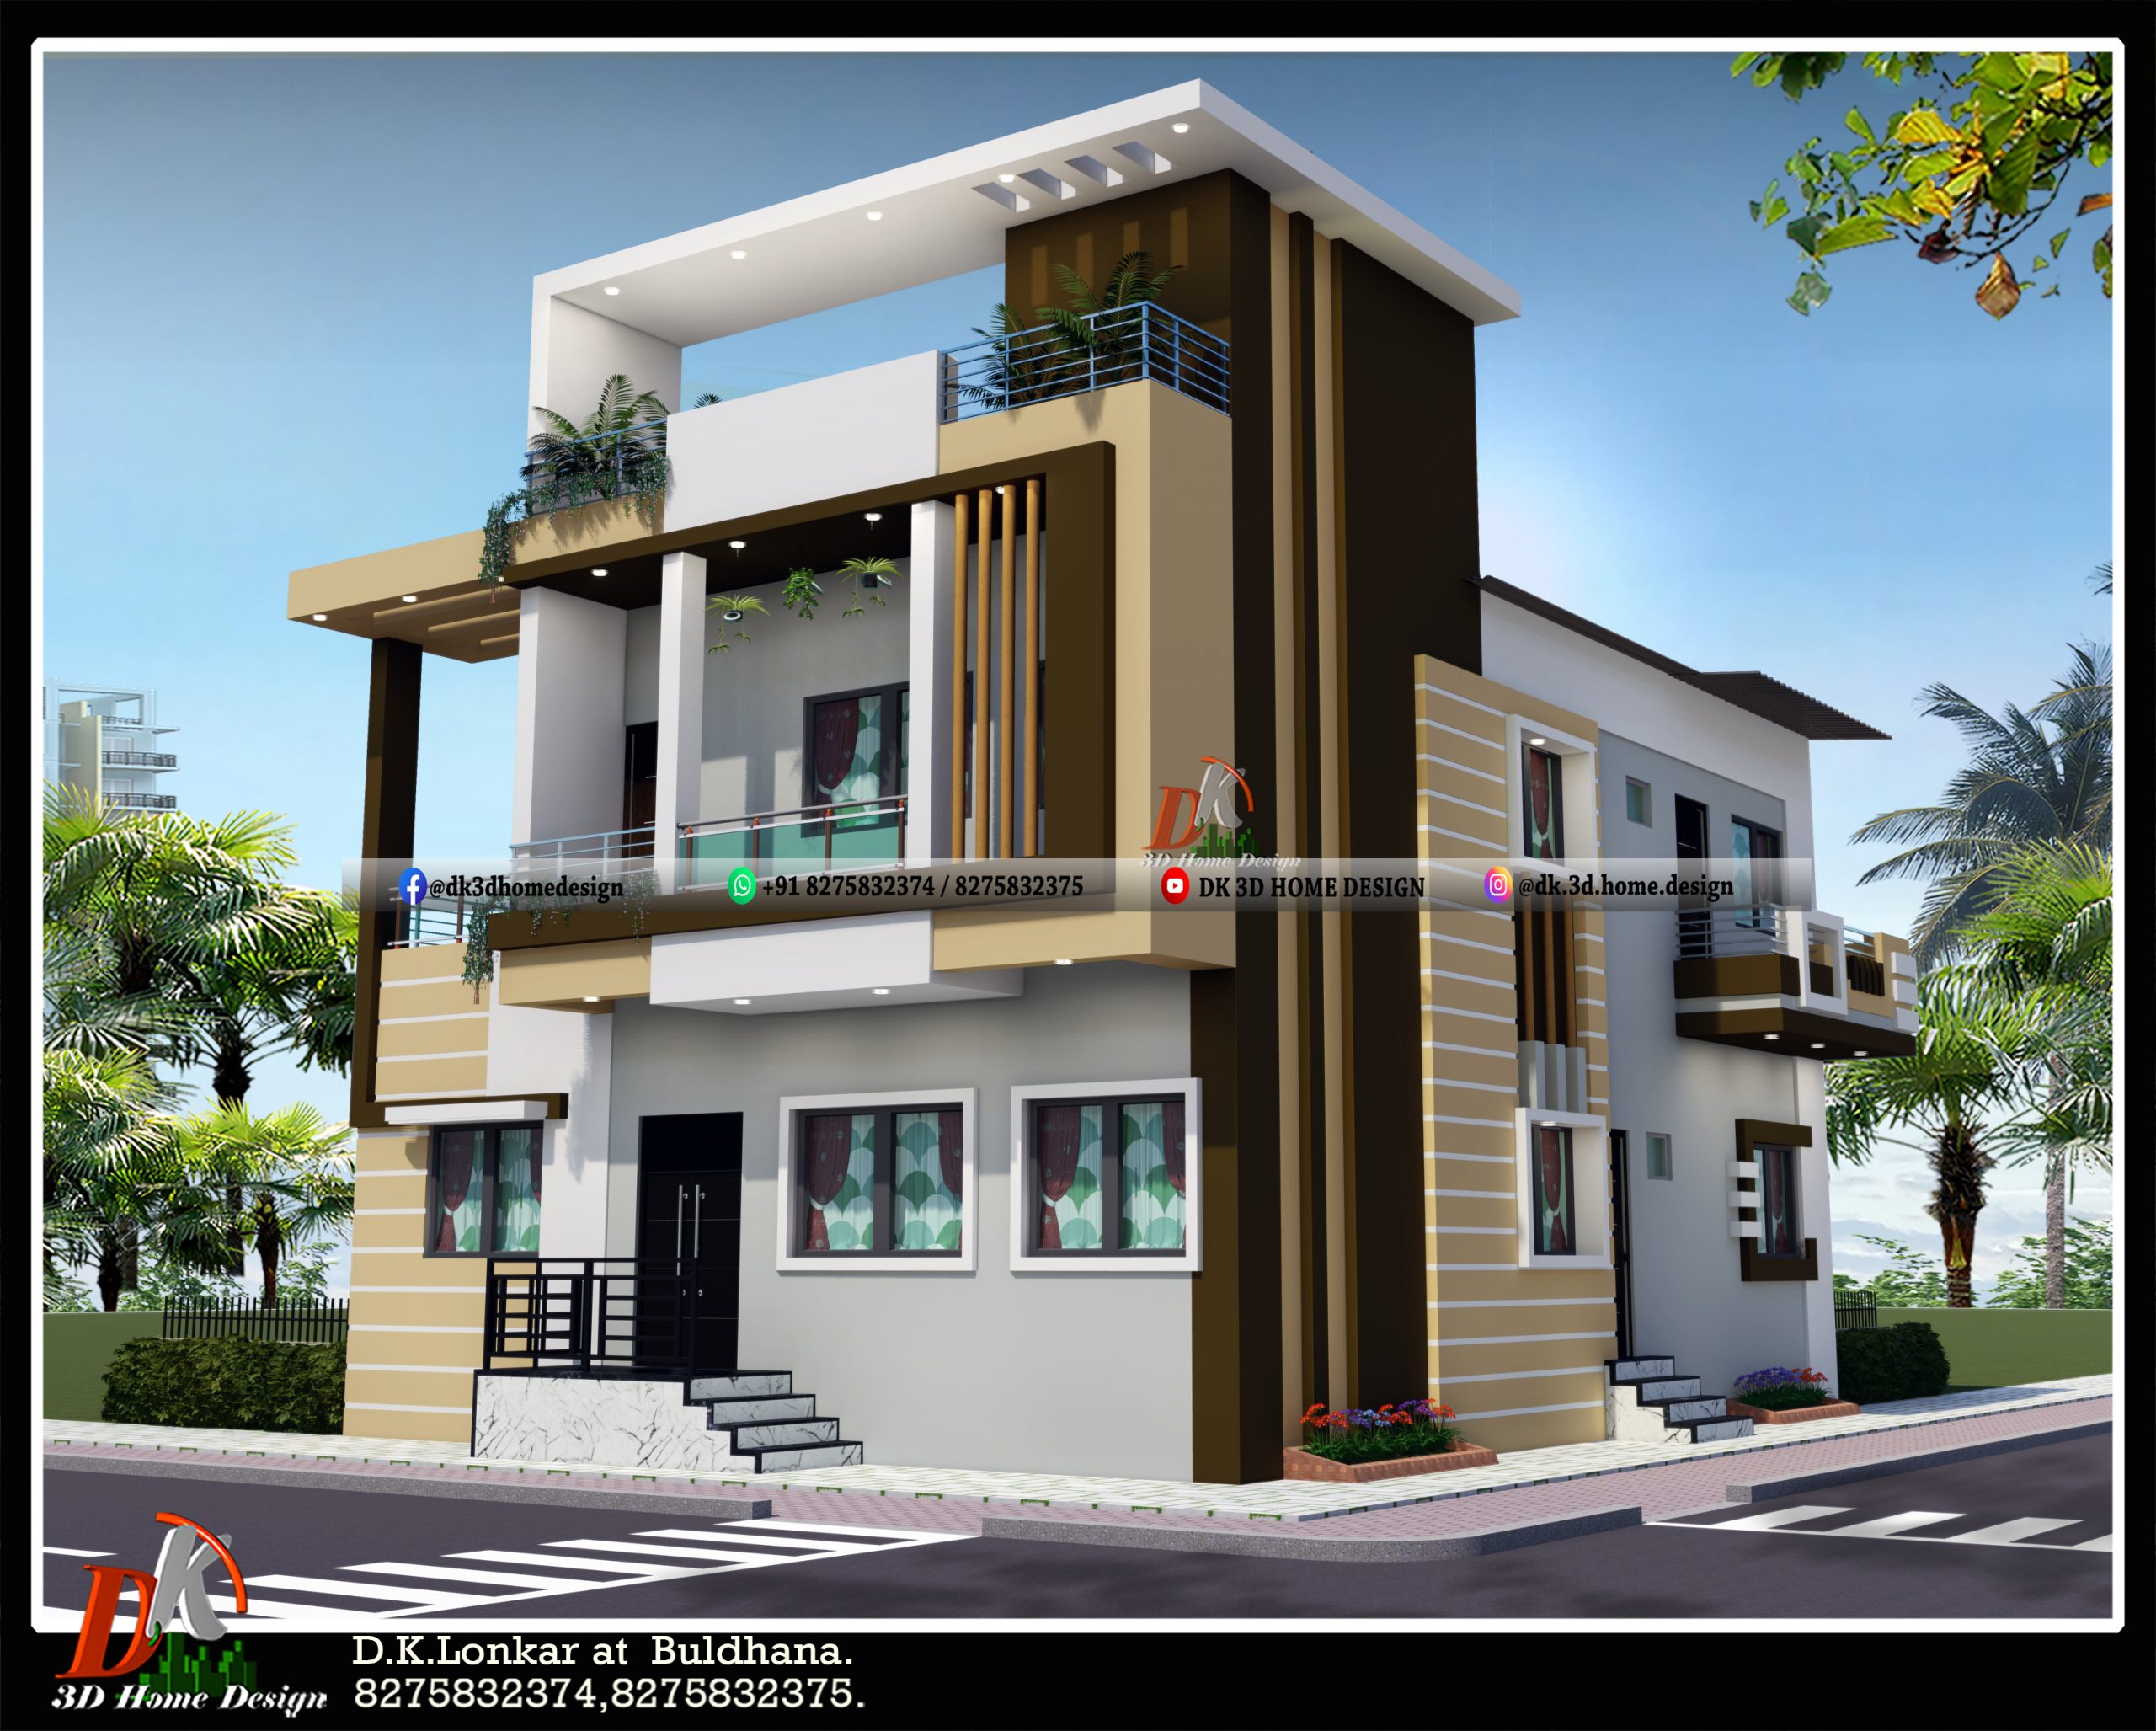 2 story house design in 30x40